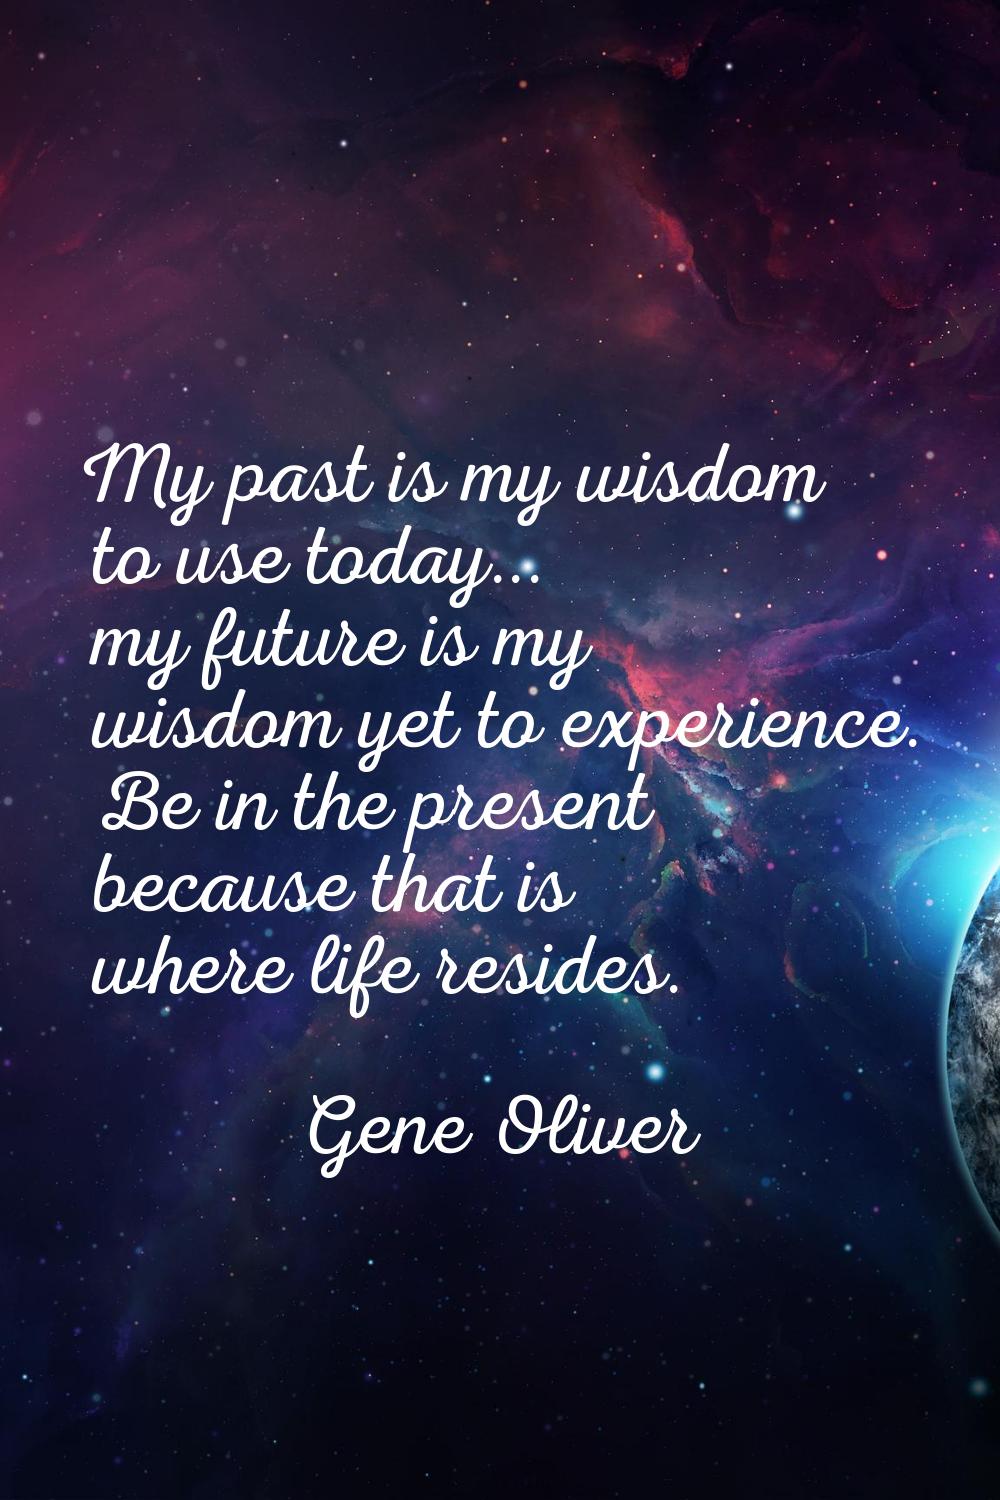 My past is my wisdom to use today... my future is my wisdom yet to experience. Be in the present be